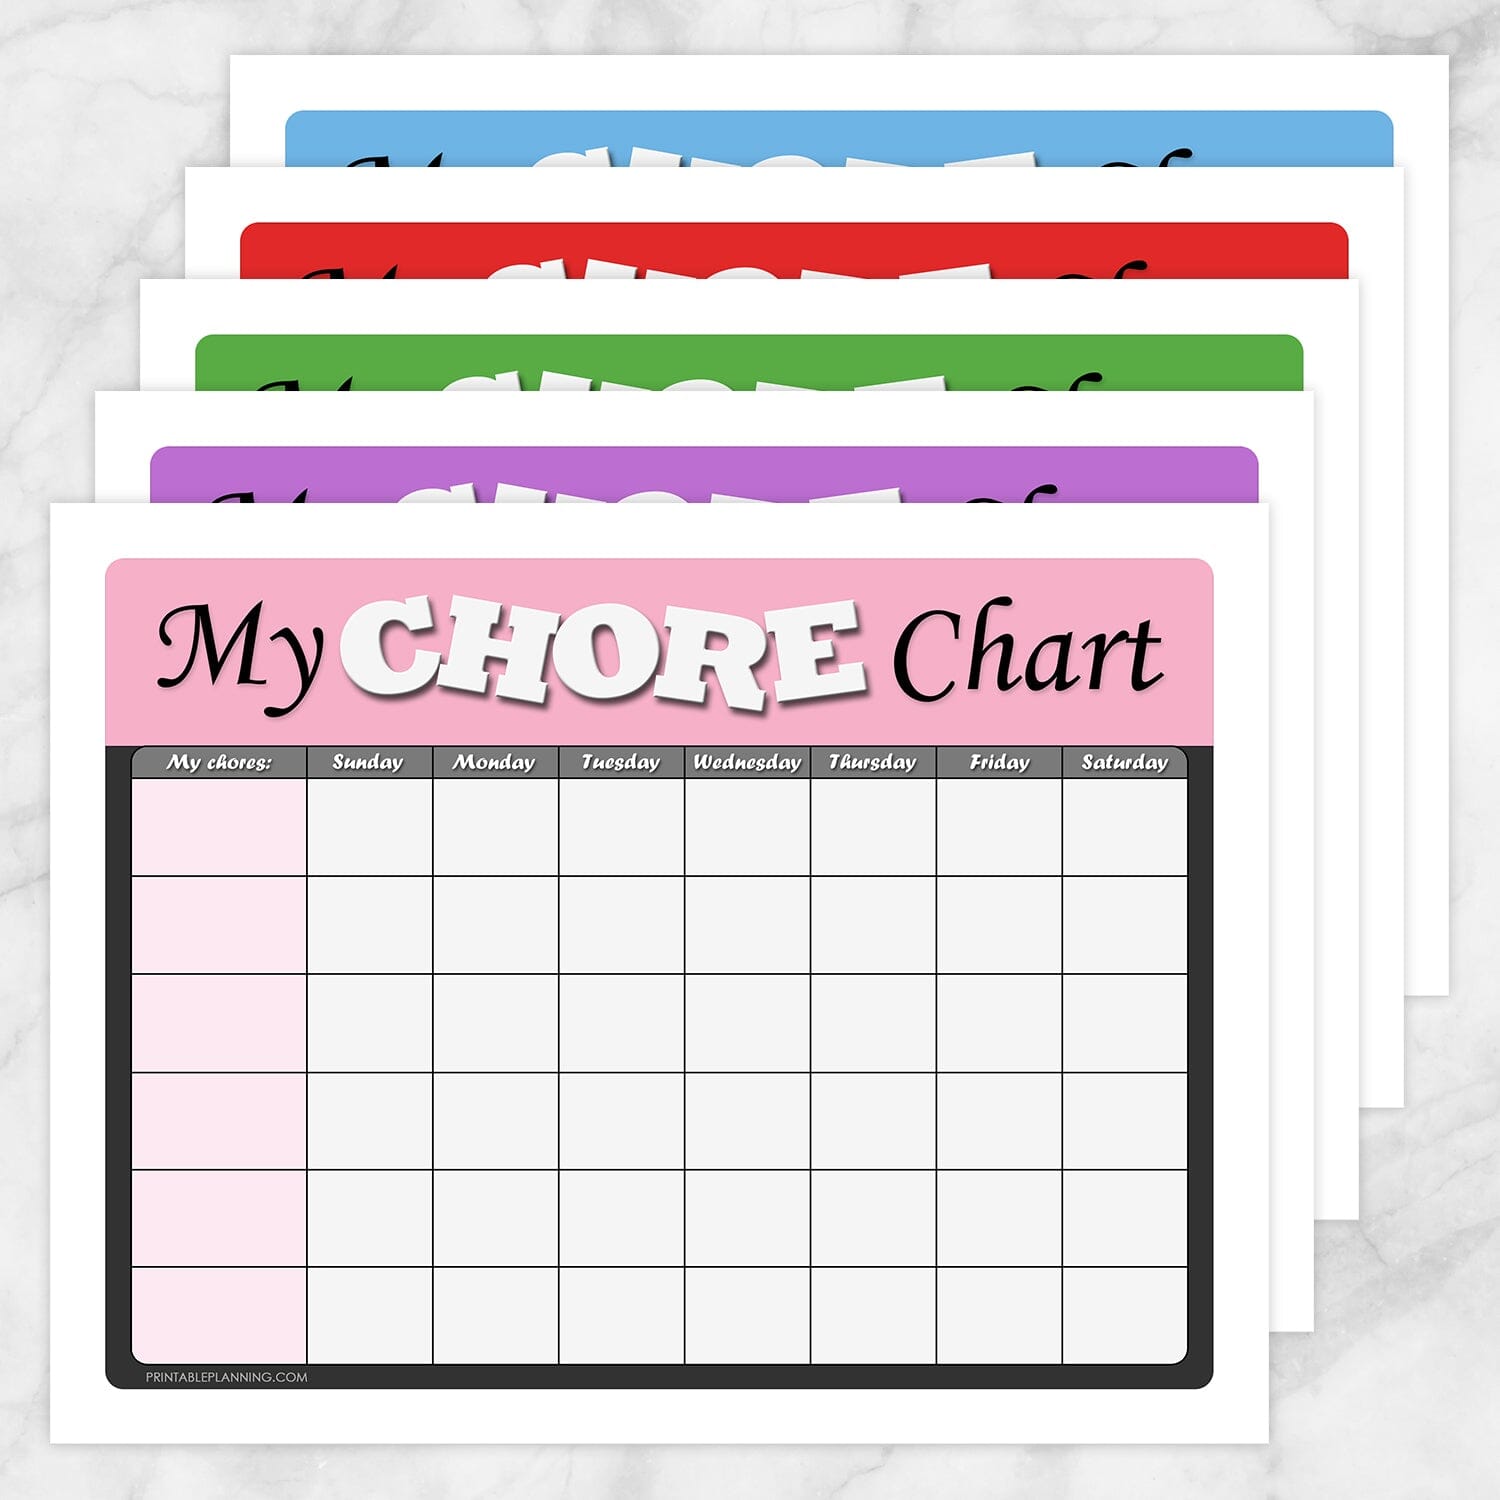 Kids Chore Chart BUNDLE - 'My Chore Chart' Weekly Page in 5 Colors -  Printable at Printable Planning for only 9.95